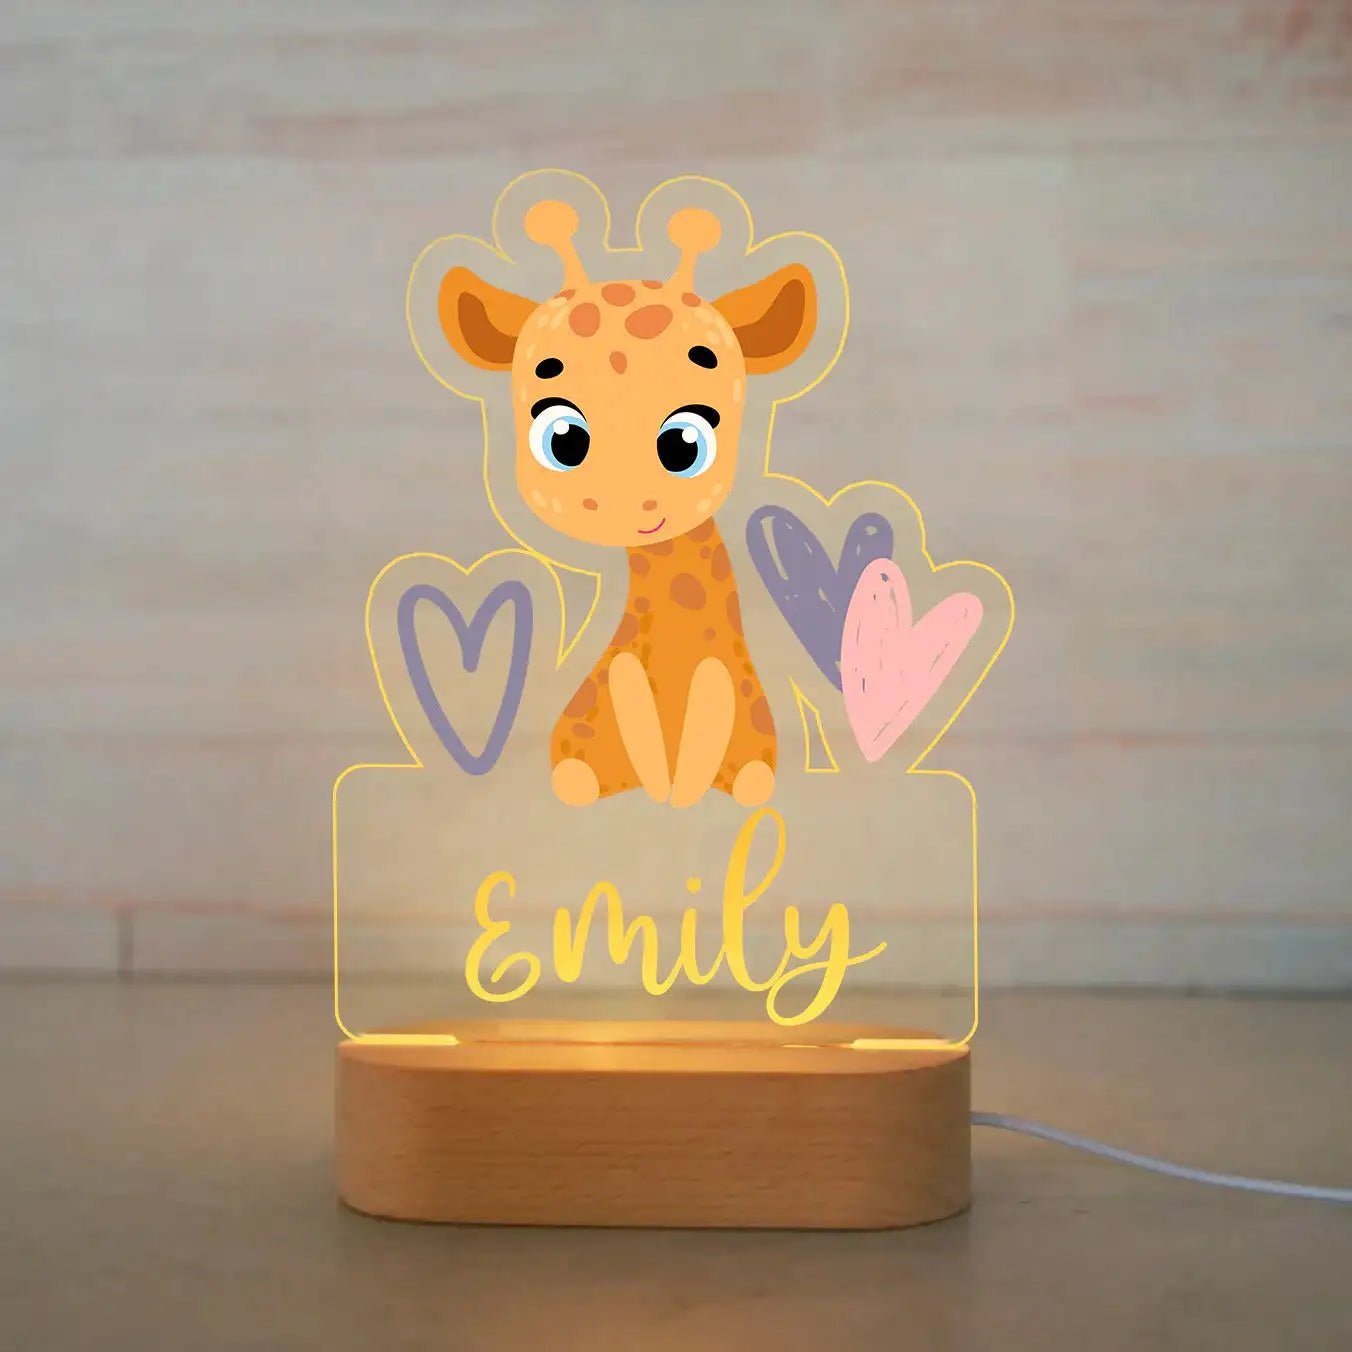 Customized Animal-themed Night Light for Kids - Personalized with Child's Name, Acrylic Lamp for Bedroom Decor